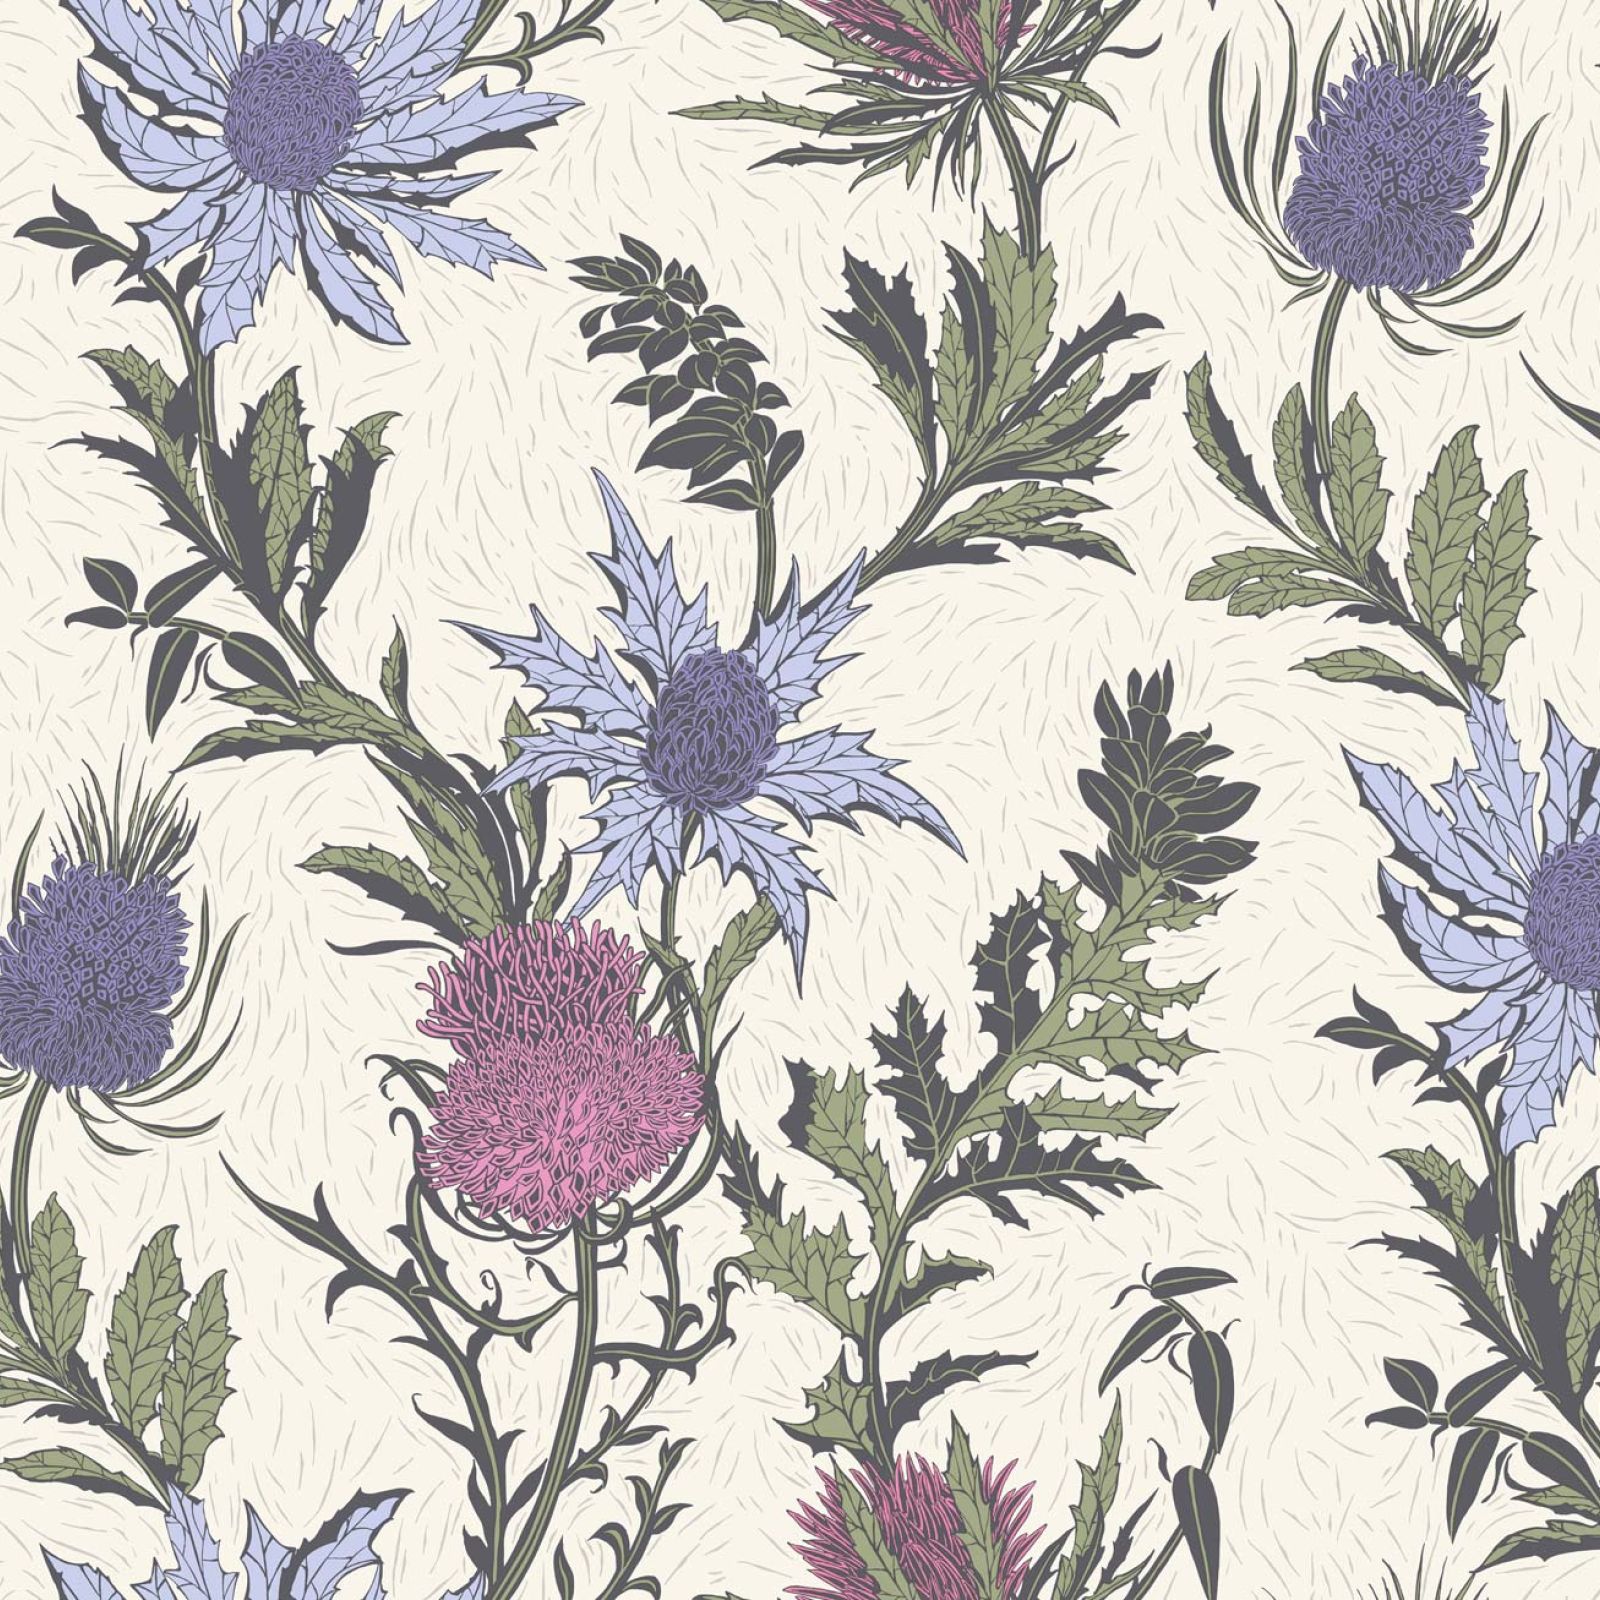 Thistle wallpaper in a choice of 3 colourways